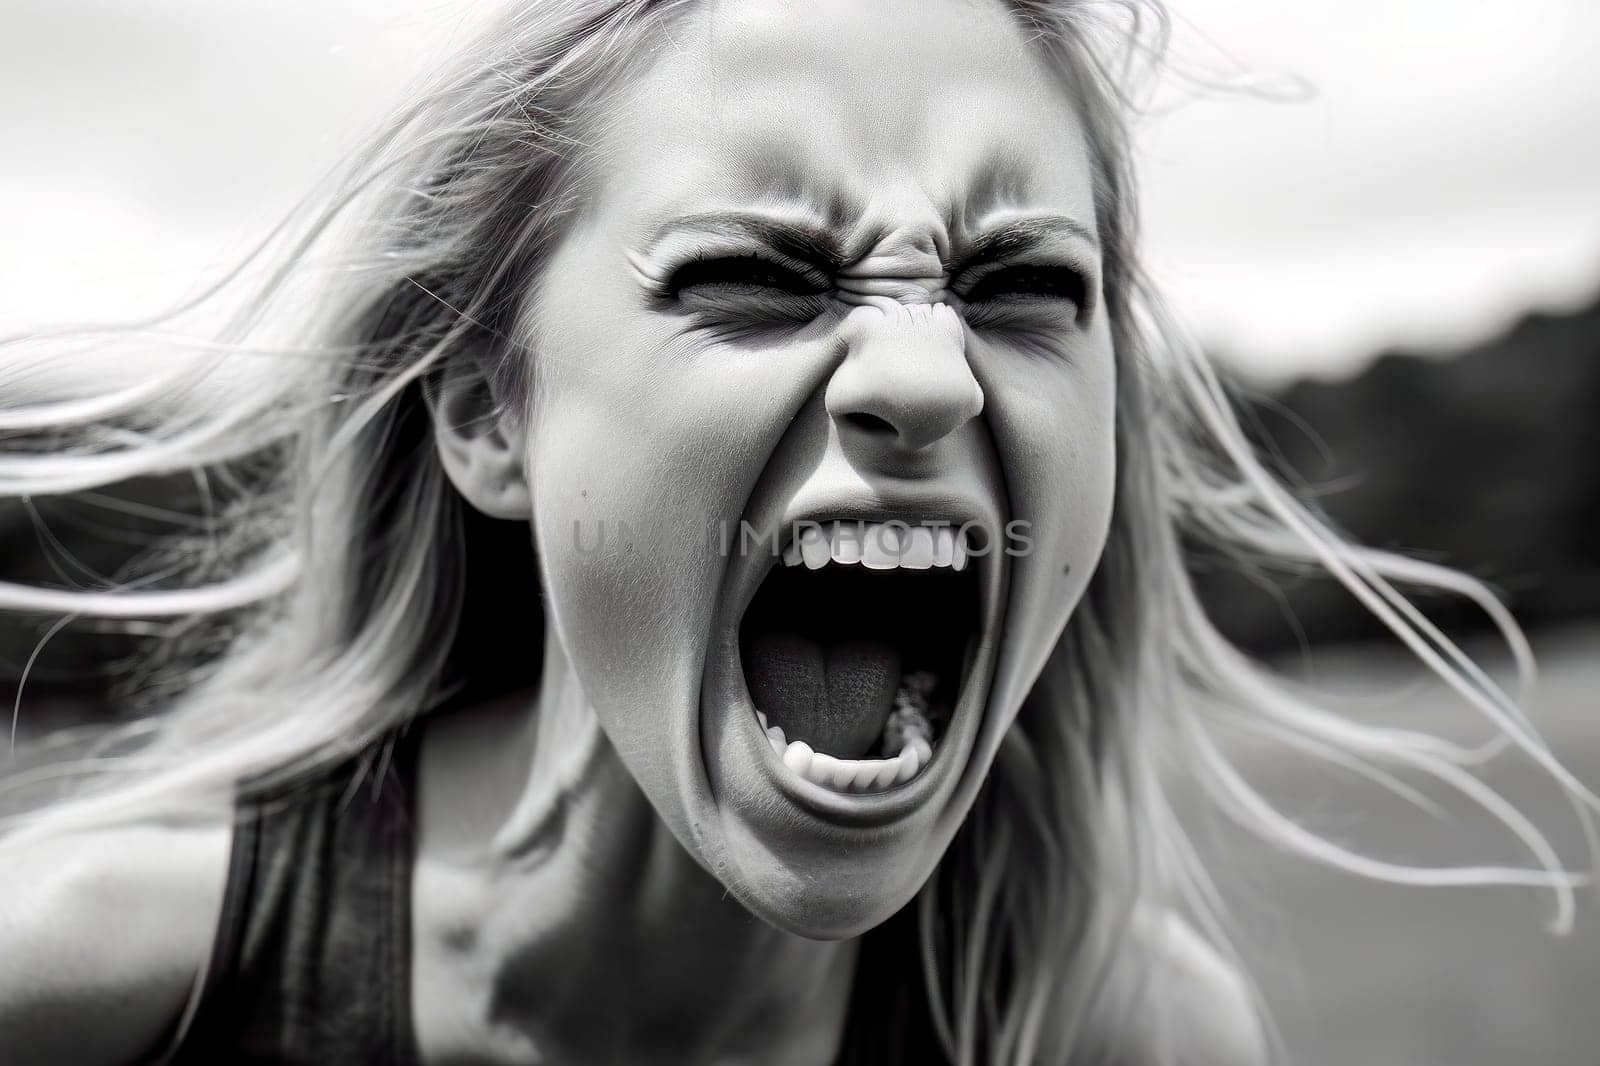 This powerful image captures an exhausted girl with closed eyes, a symbol of burnout, as she screams in anger